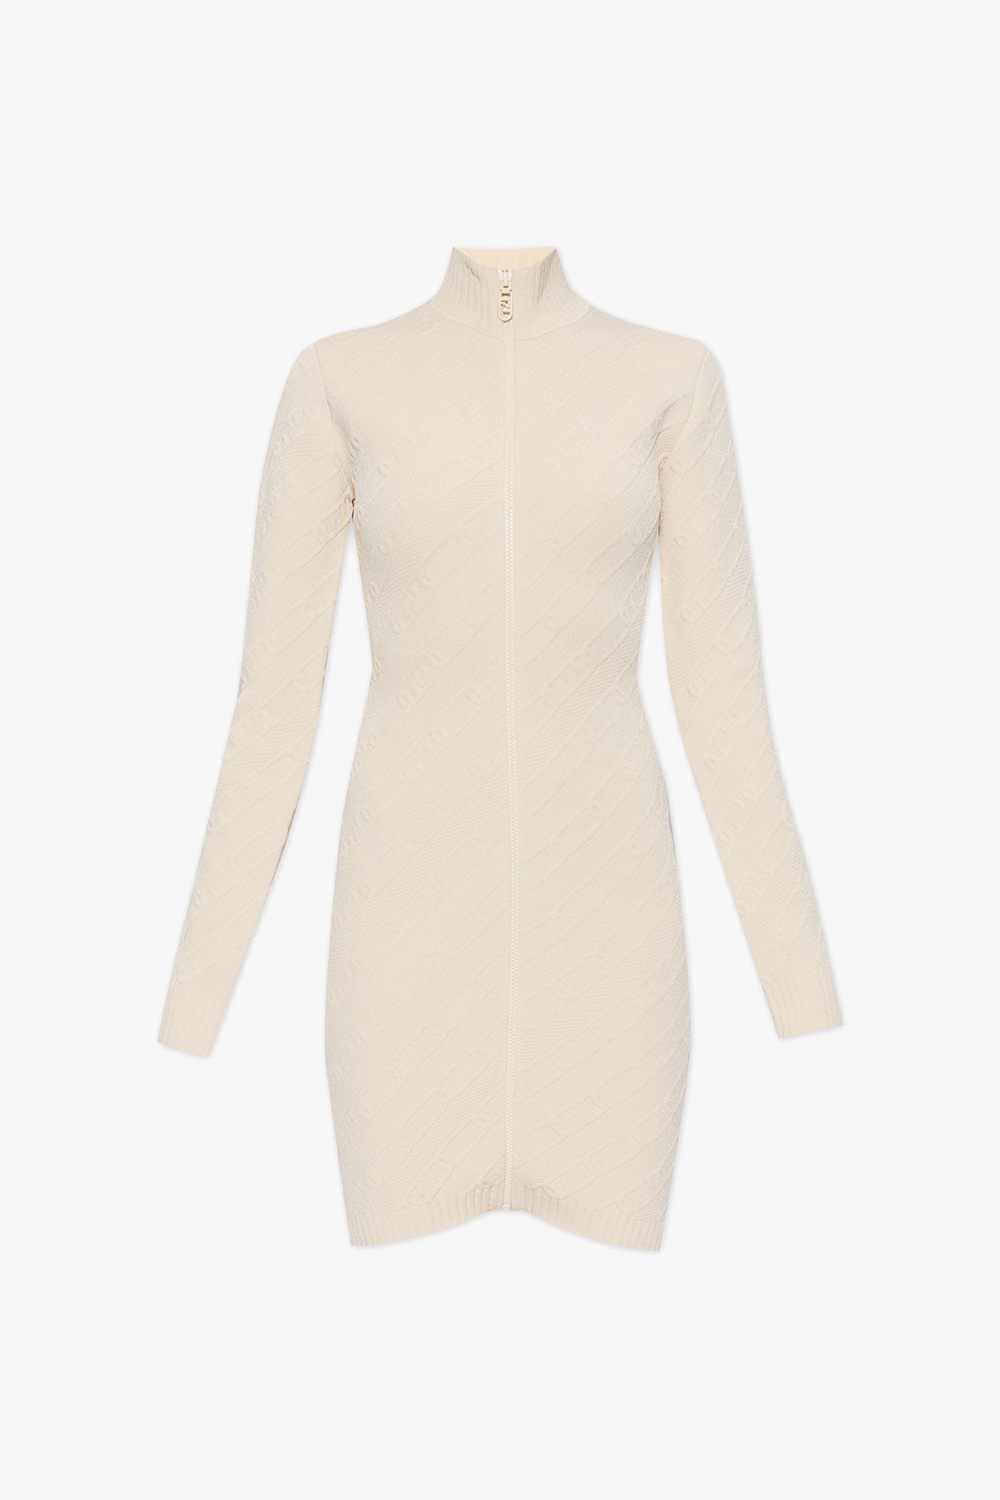 Fendi Dress with stand collar